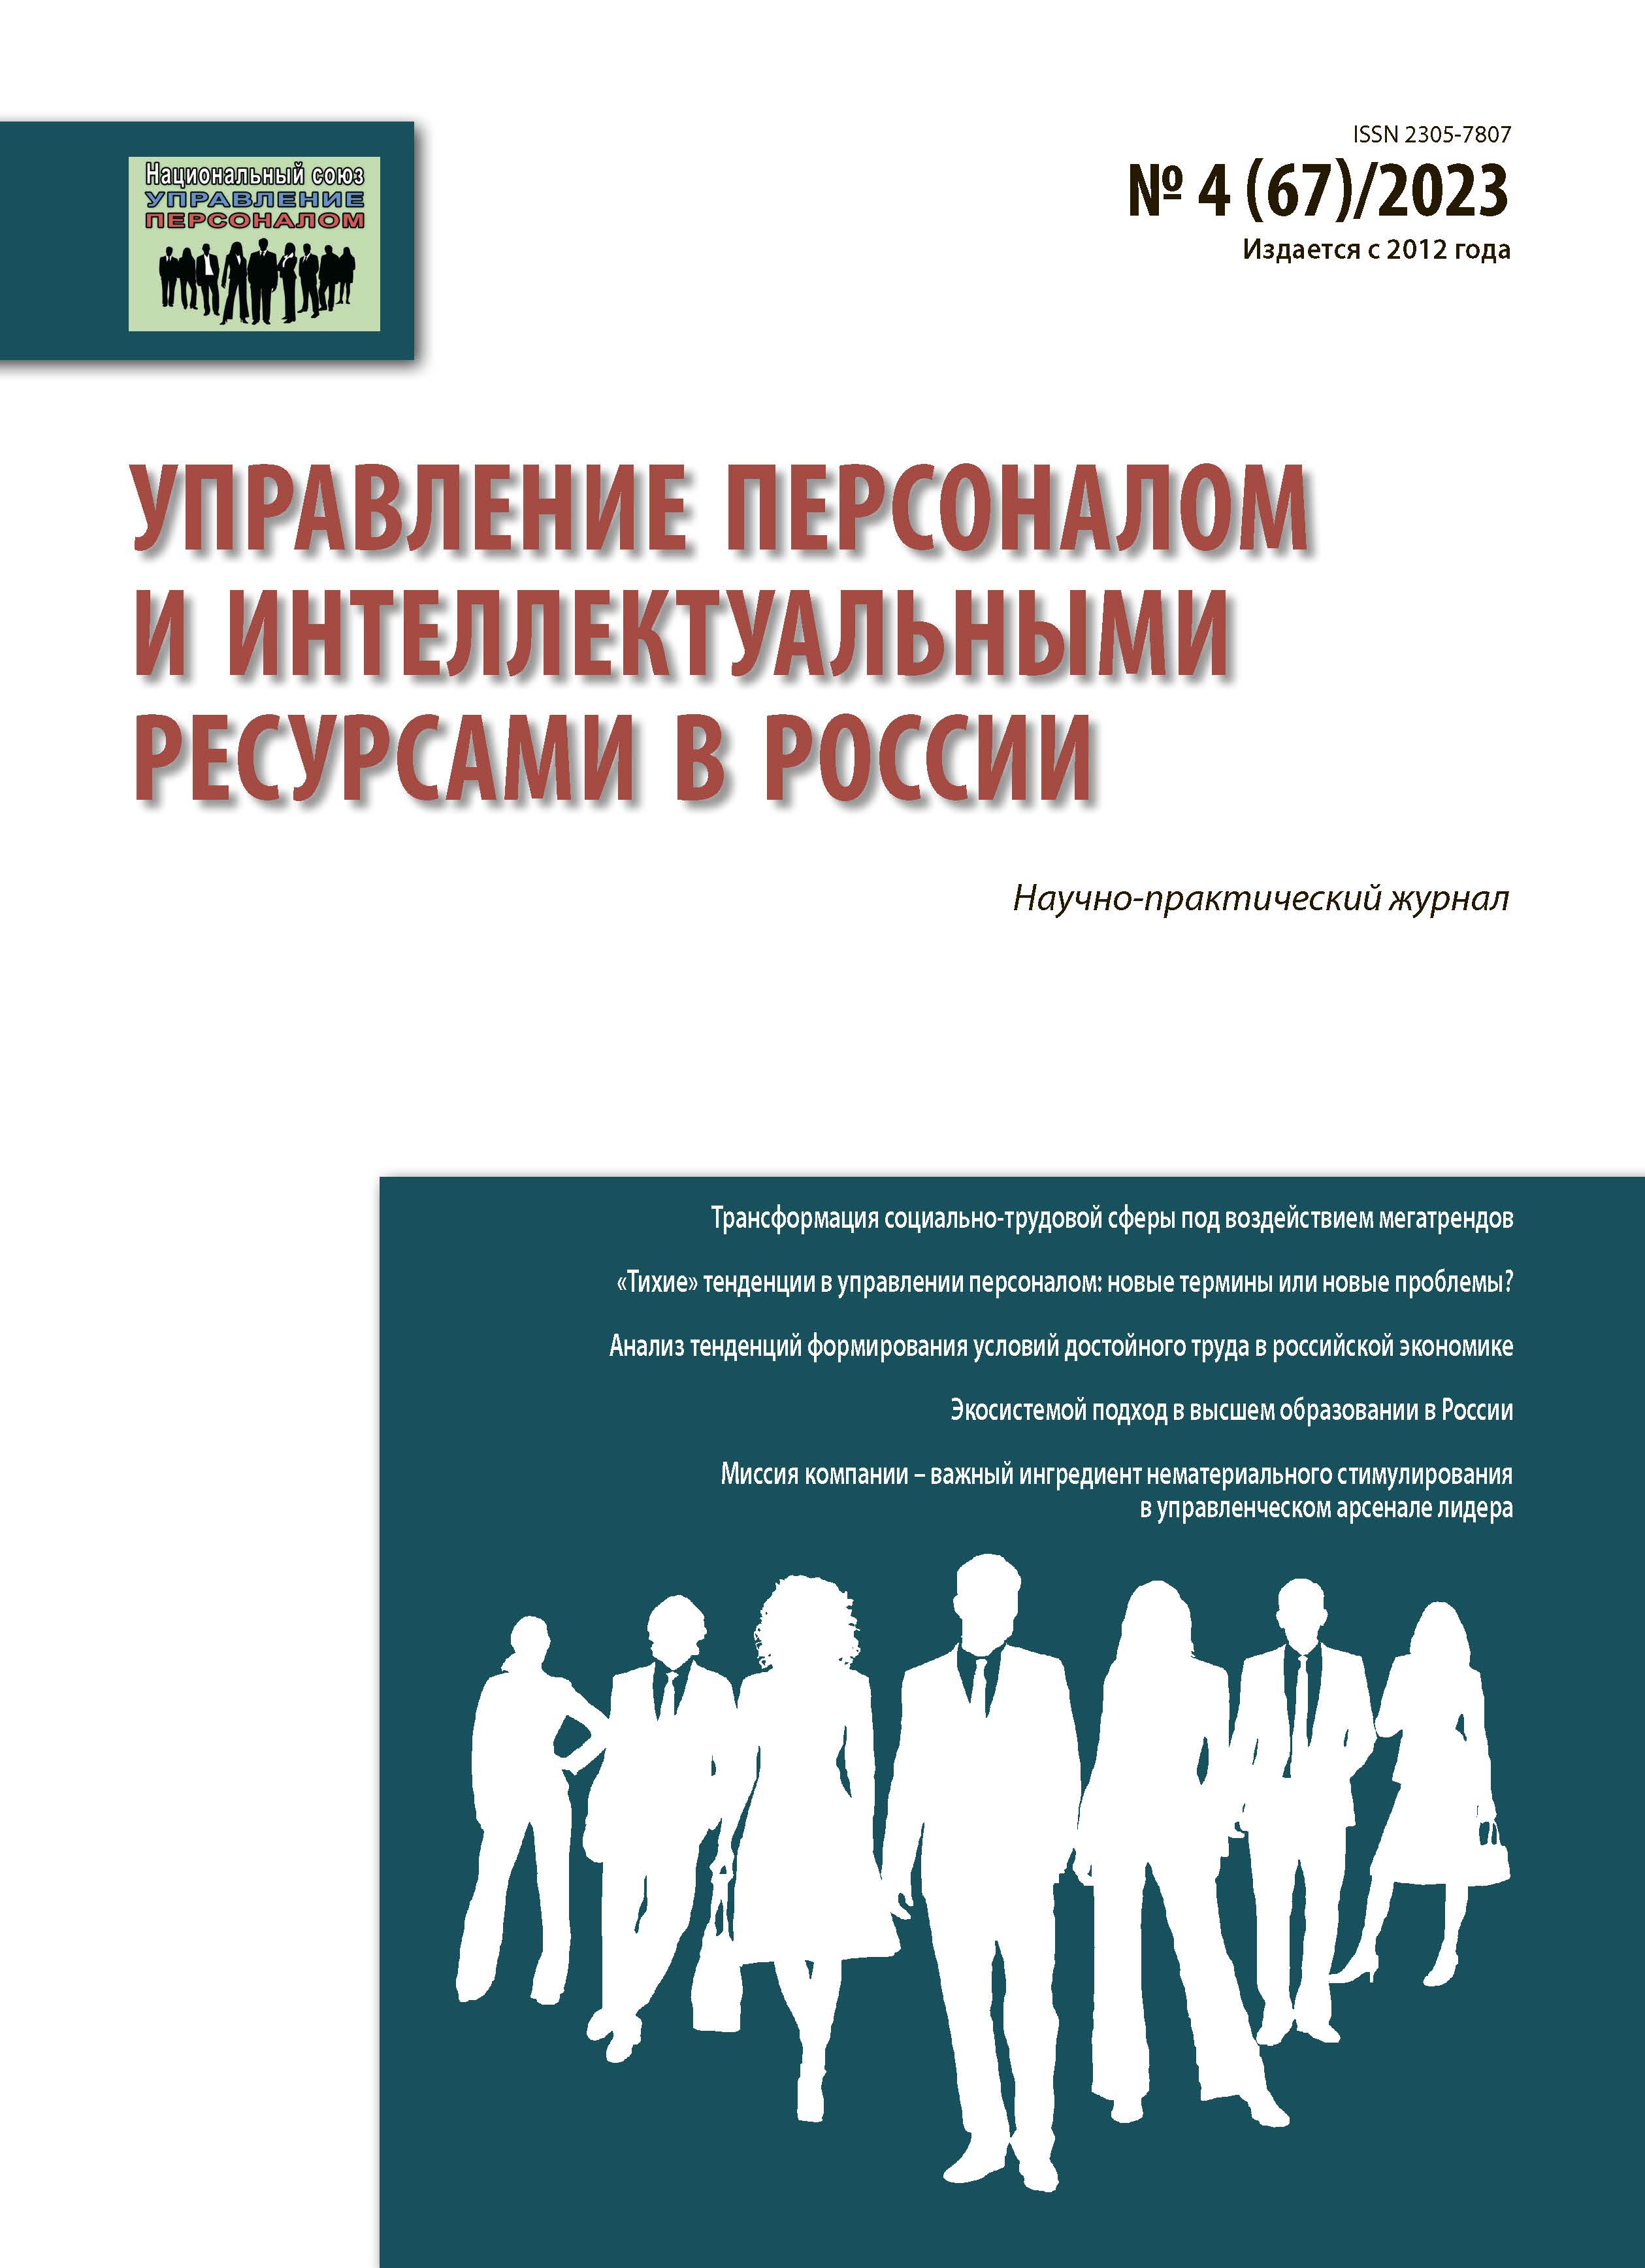                         ECOSYSTEM APPROACH IN HIGHER EDUCATION IN RUSSIA IN THE ASPECT  OF HUMAN RESOURCE MANAGEMENT
            